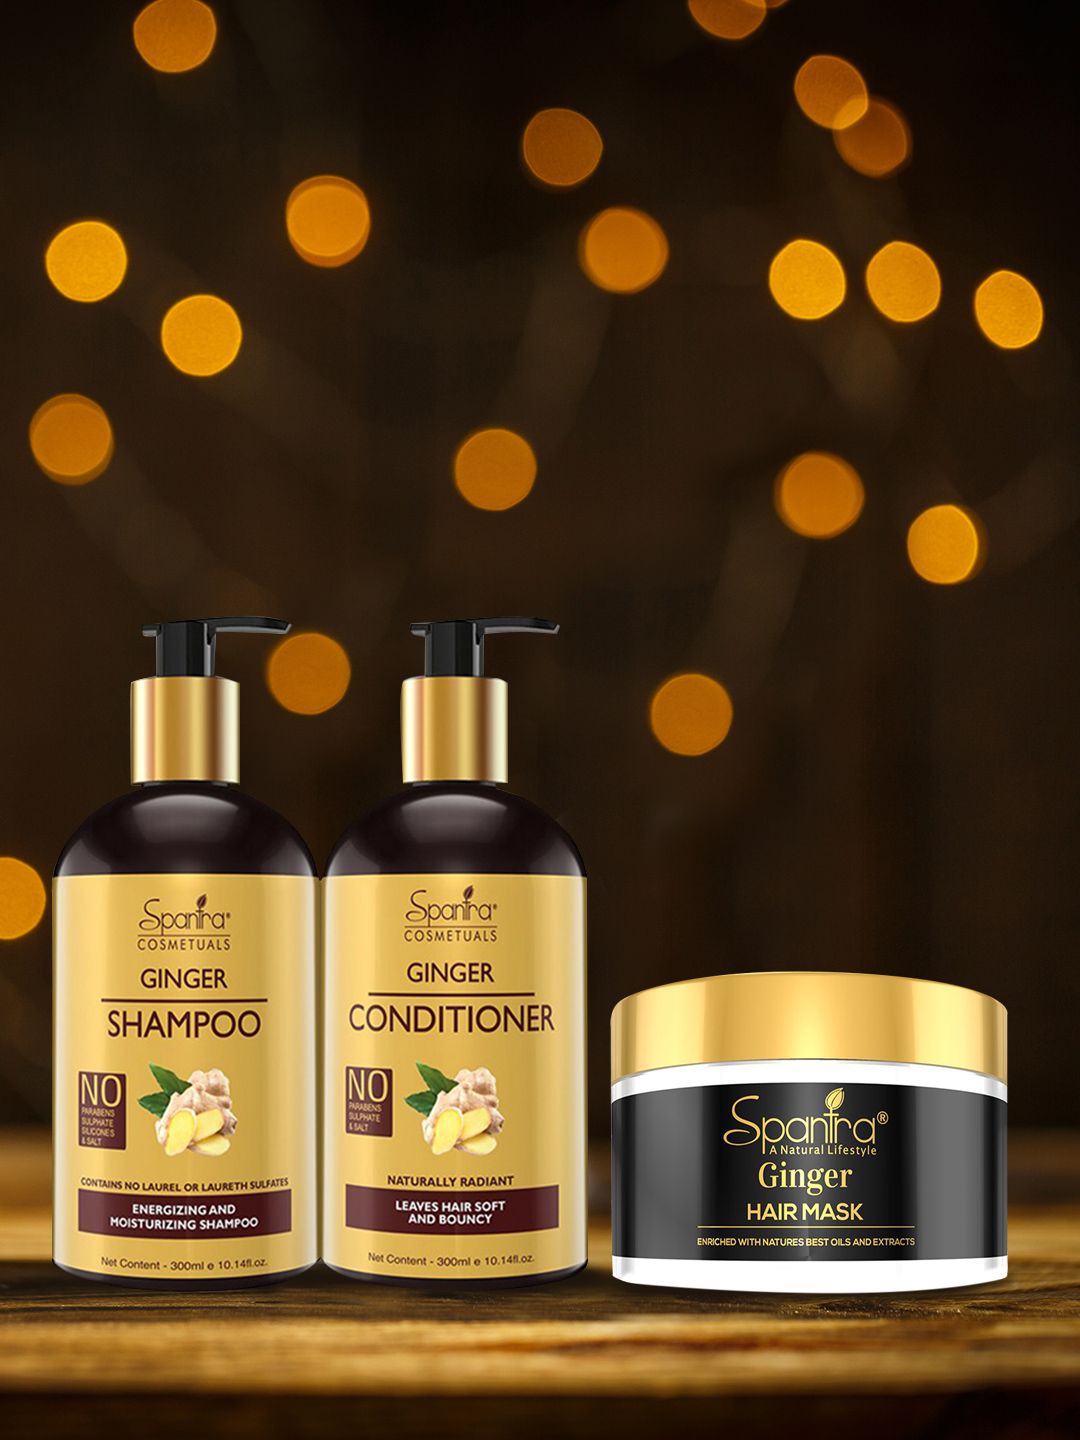 Spantra Set of Ginger Shampoo - Conditioner & Hair Mask Price in India